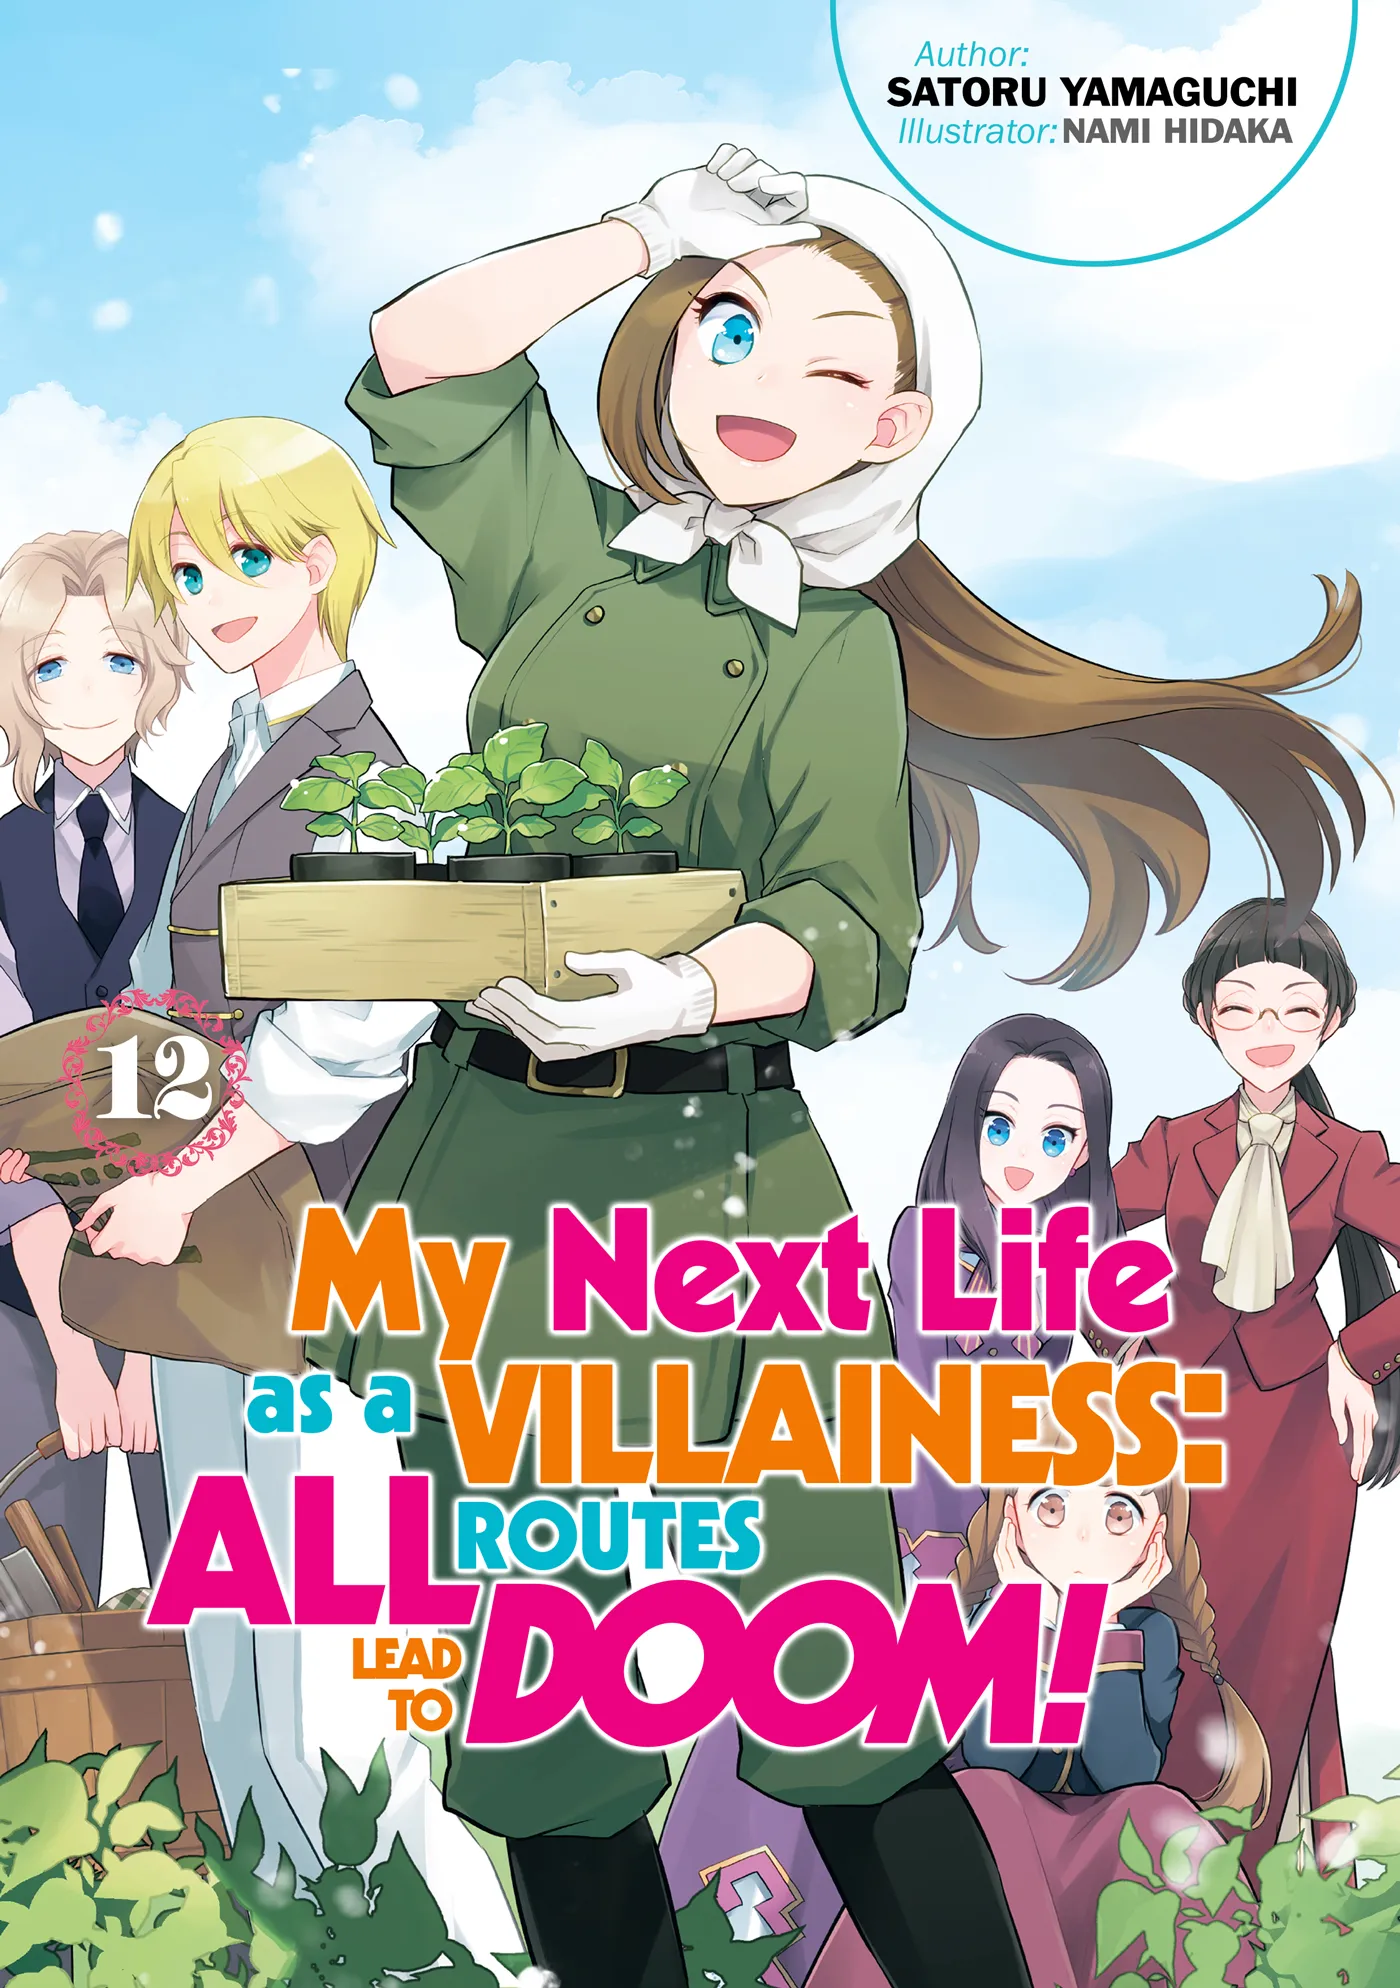 My Next Life as a Villainess: All Routes Lead to Doom! Volume 12 (My Next Life as a Villainess: All Routes Lead to Doom! #12)